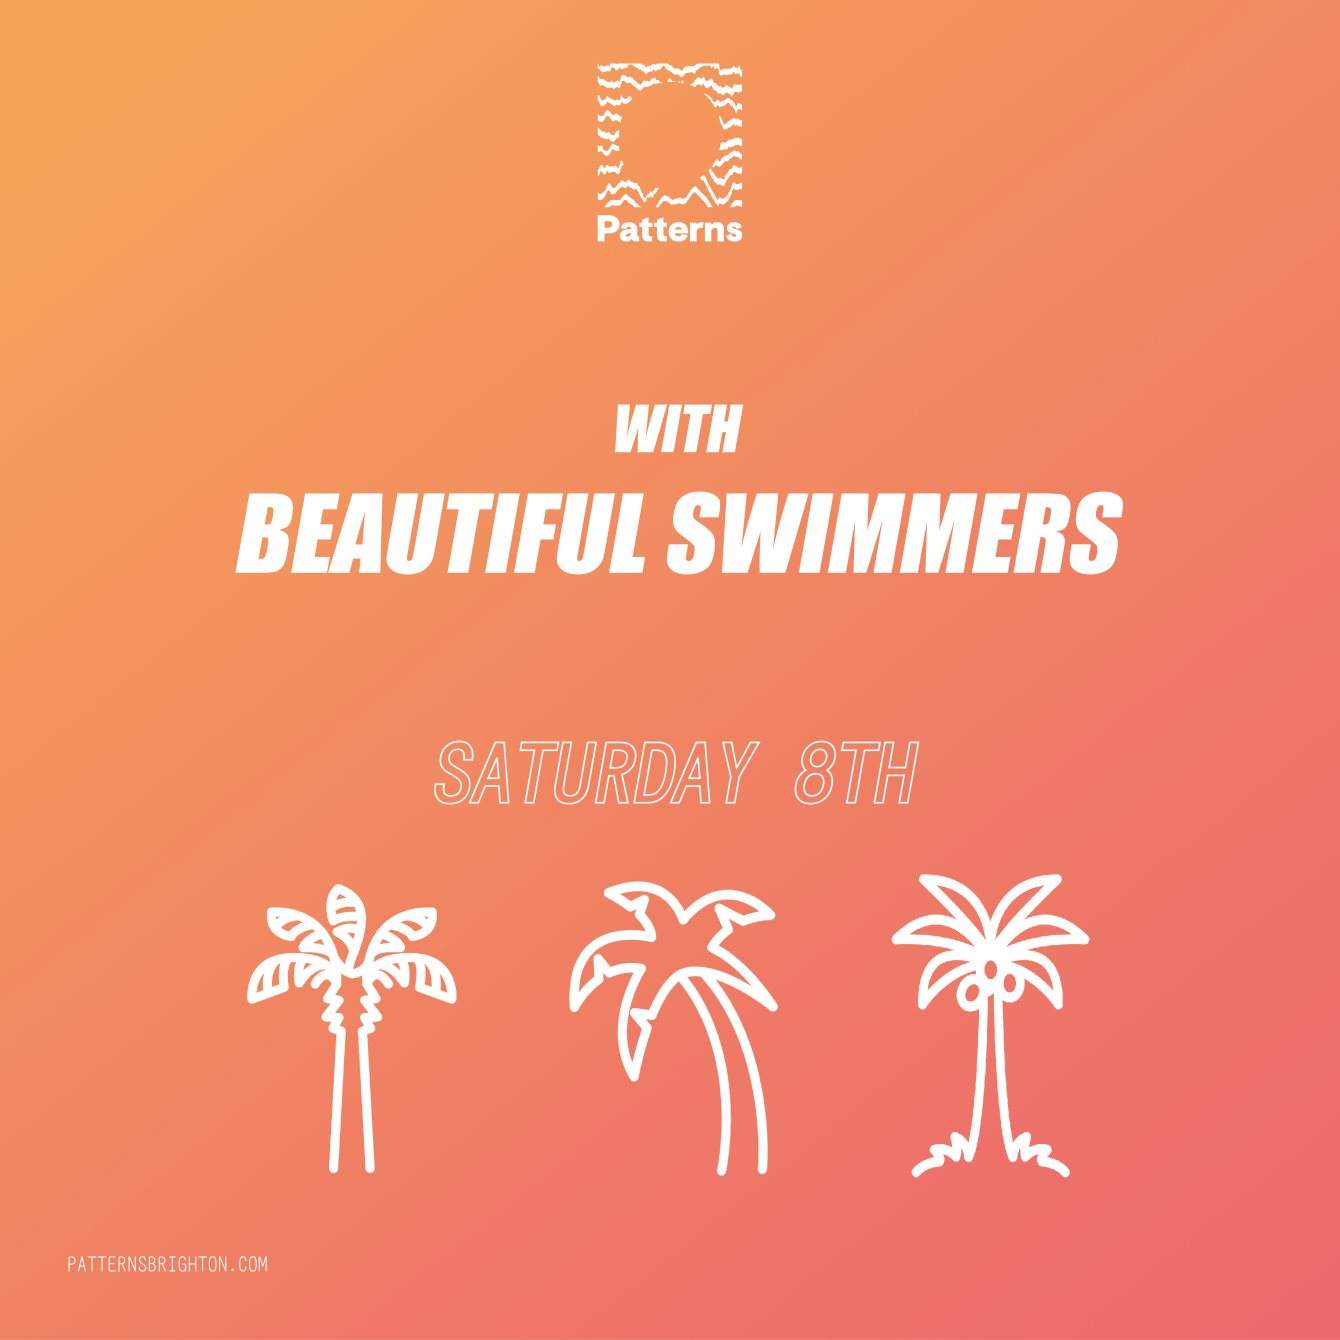 Patterns with Beautiful Swimmers - Página frontal